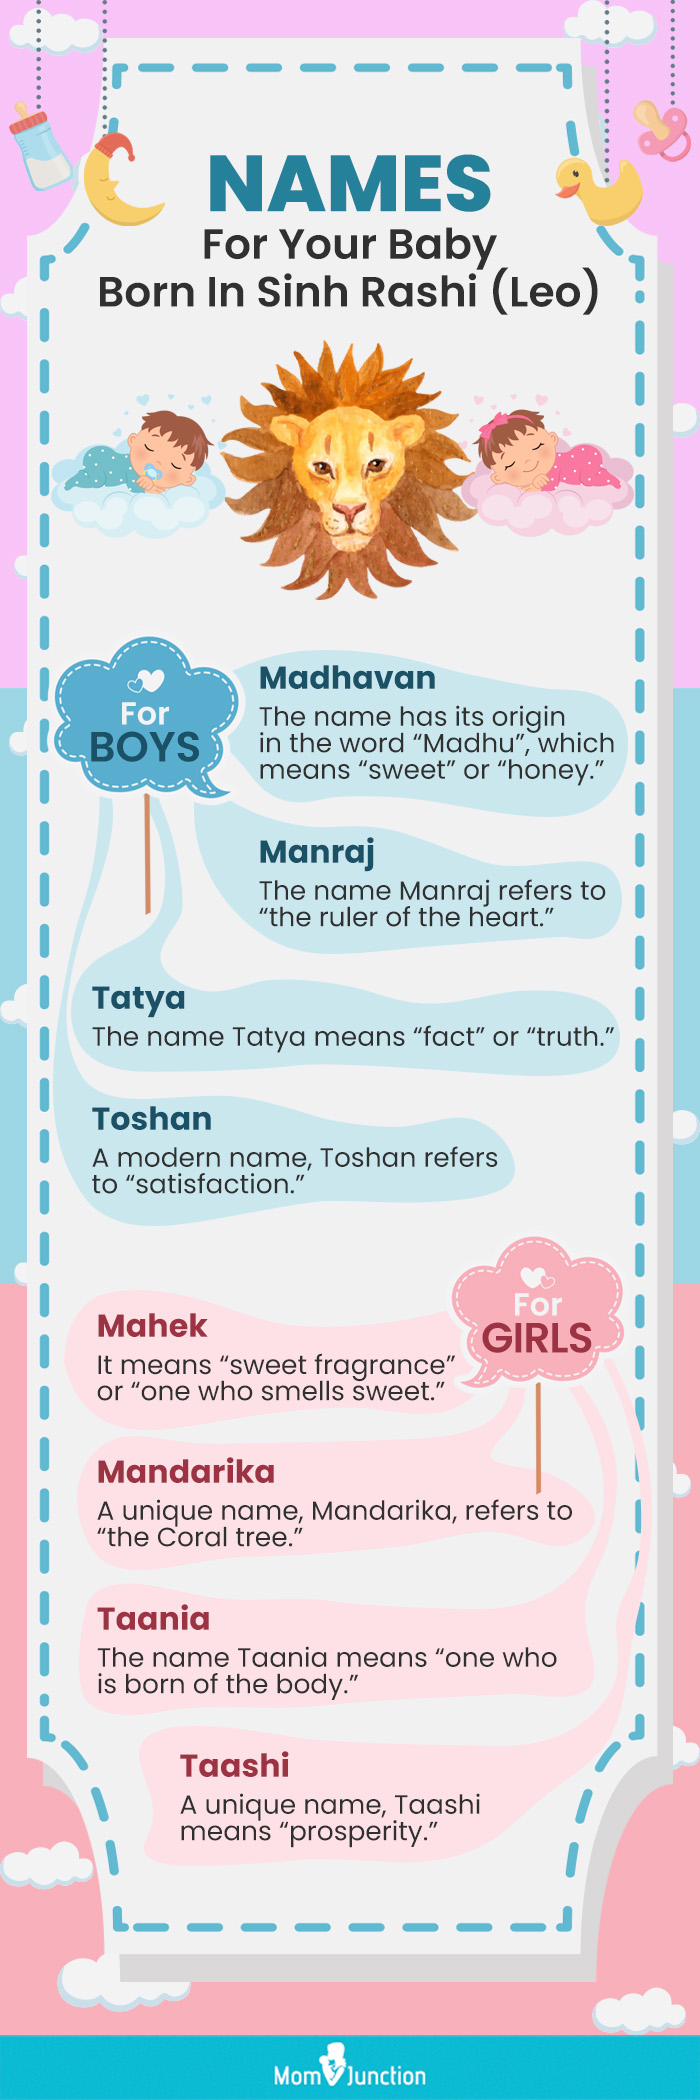 names for your baby born in sinh rashi (infographic)